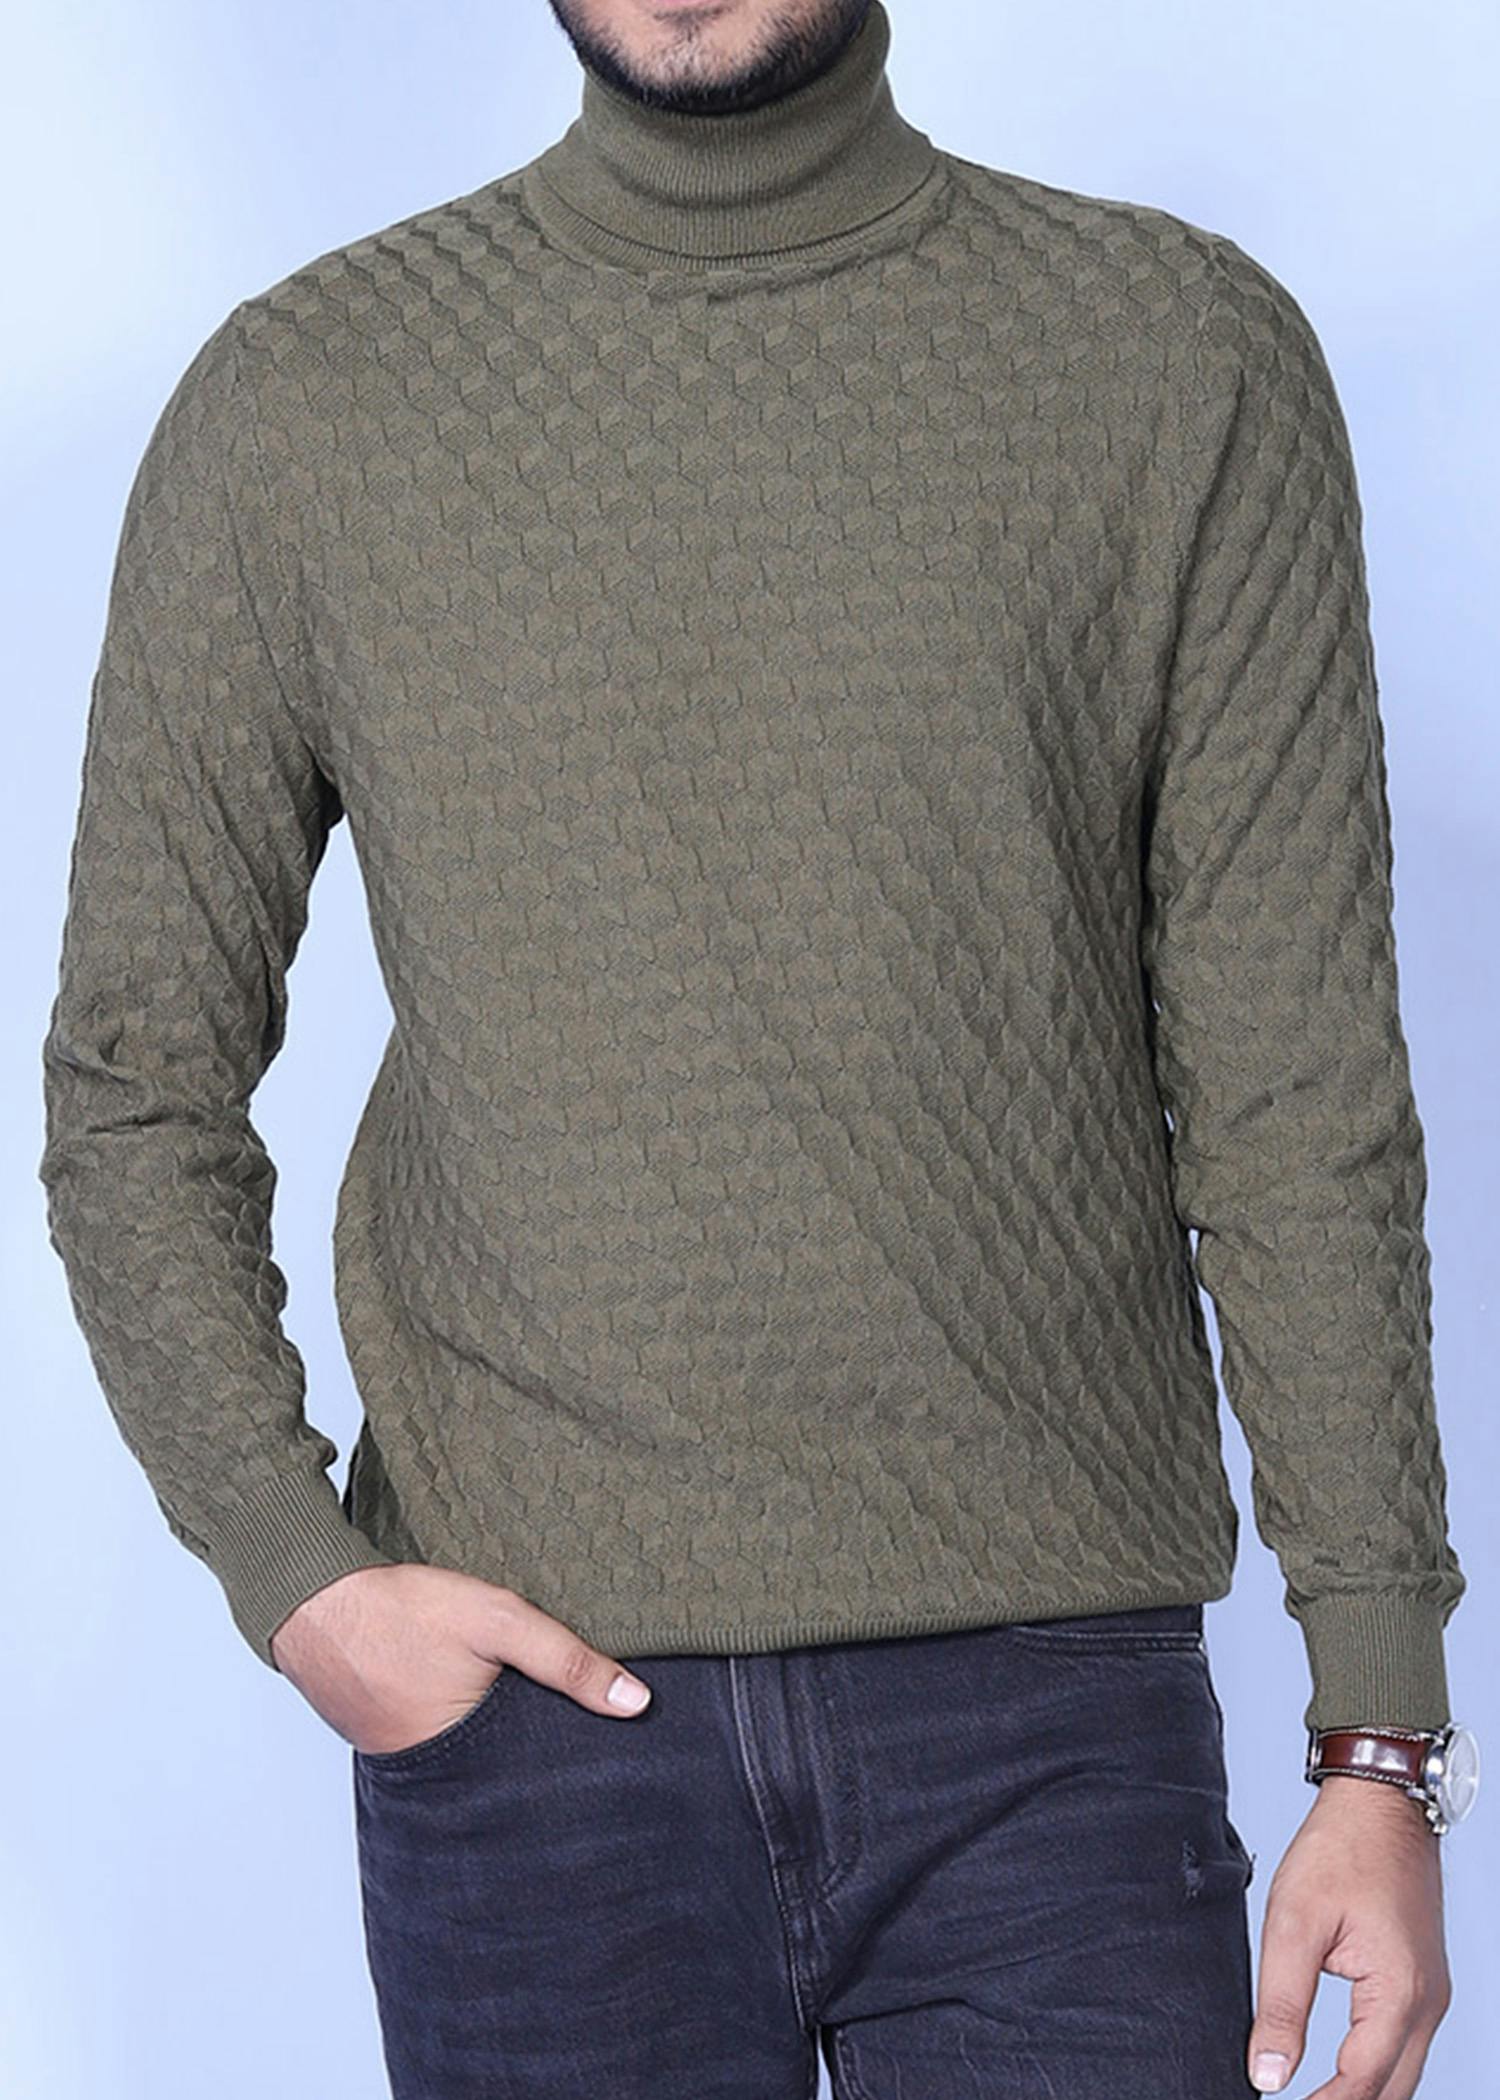 hornero ii sweater olive color headcropped